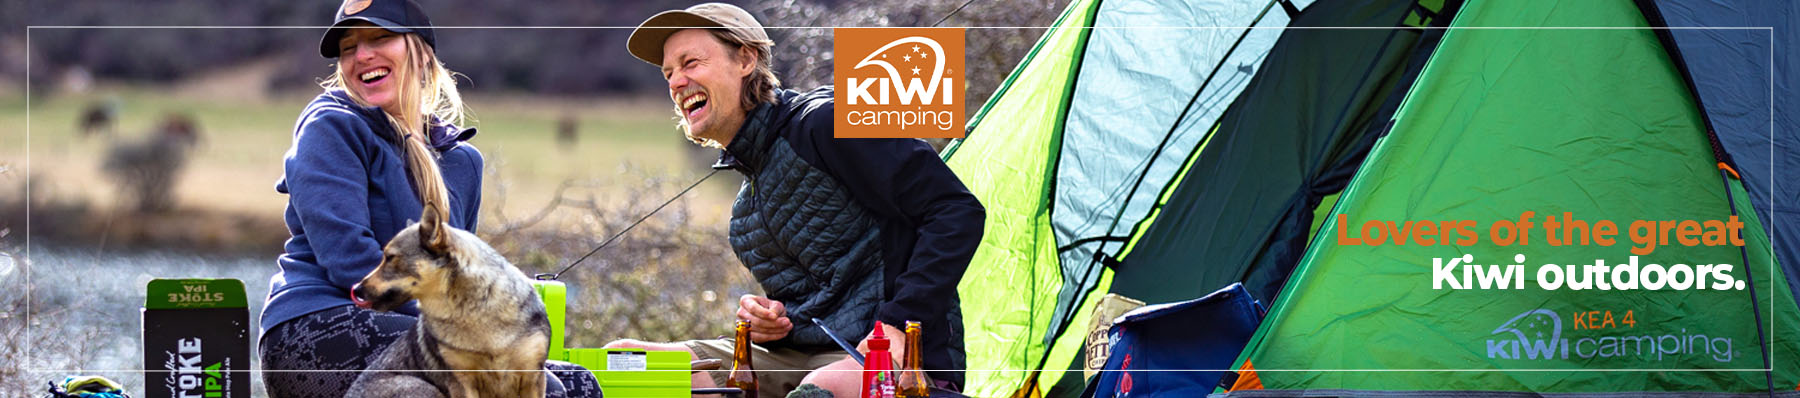 Shop Kiwi Camping tents, camping and accessories online now at Outdoor Action.